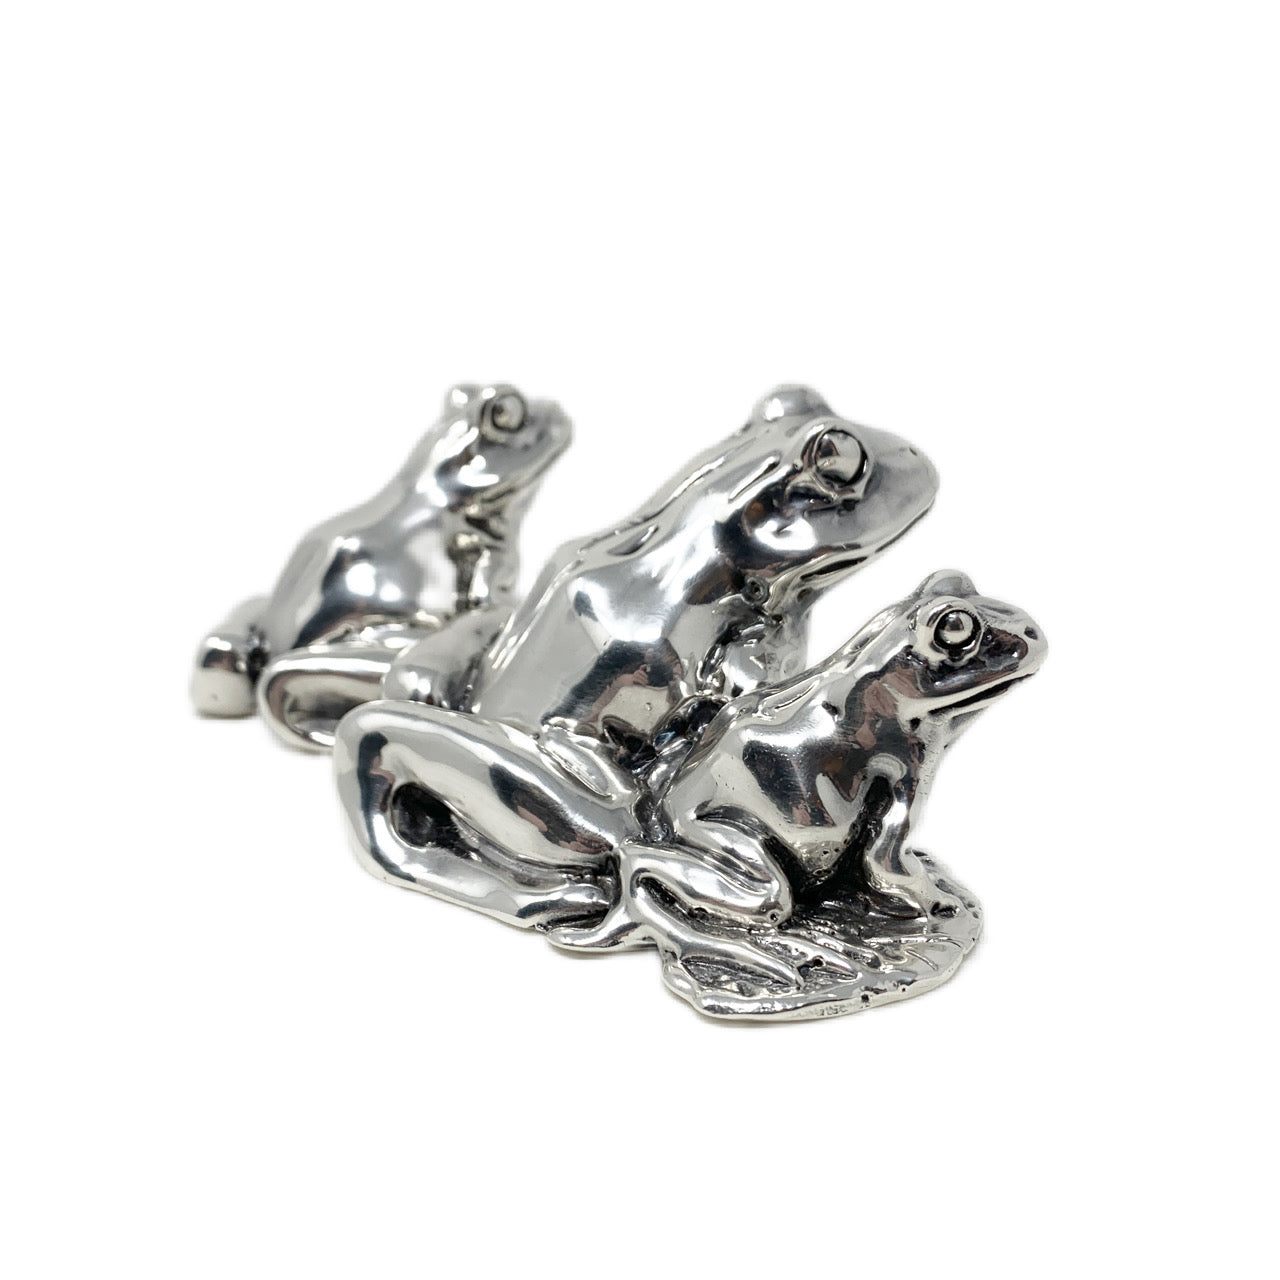 Vintage Sterling Silver Three Frogs Figurine